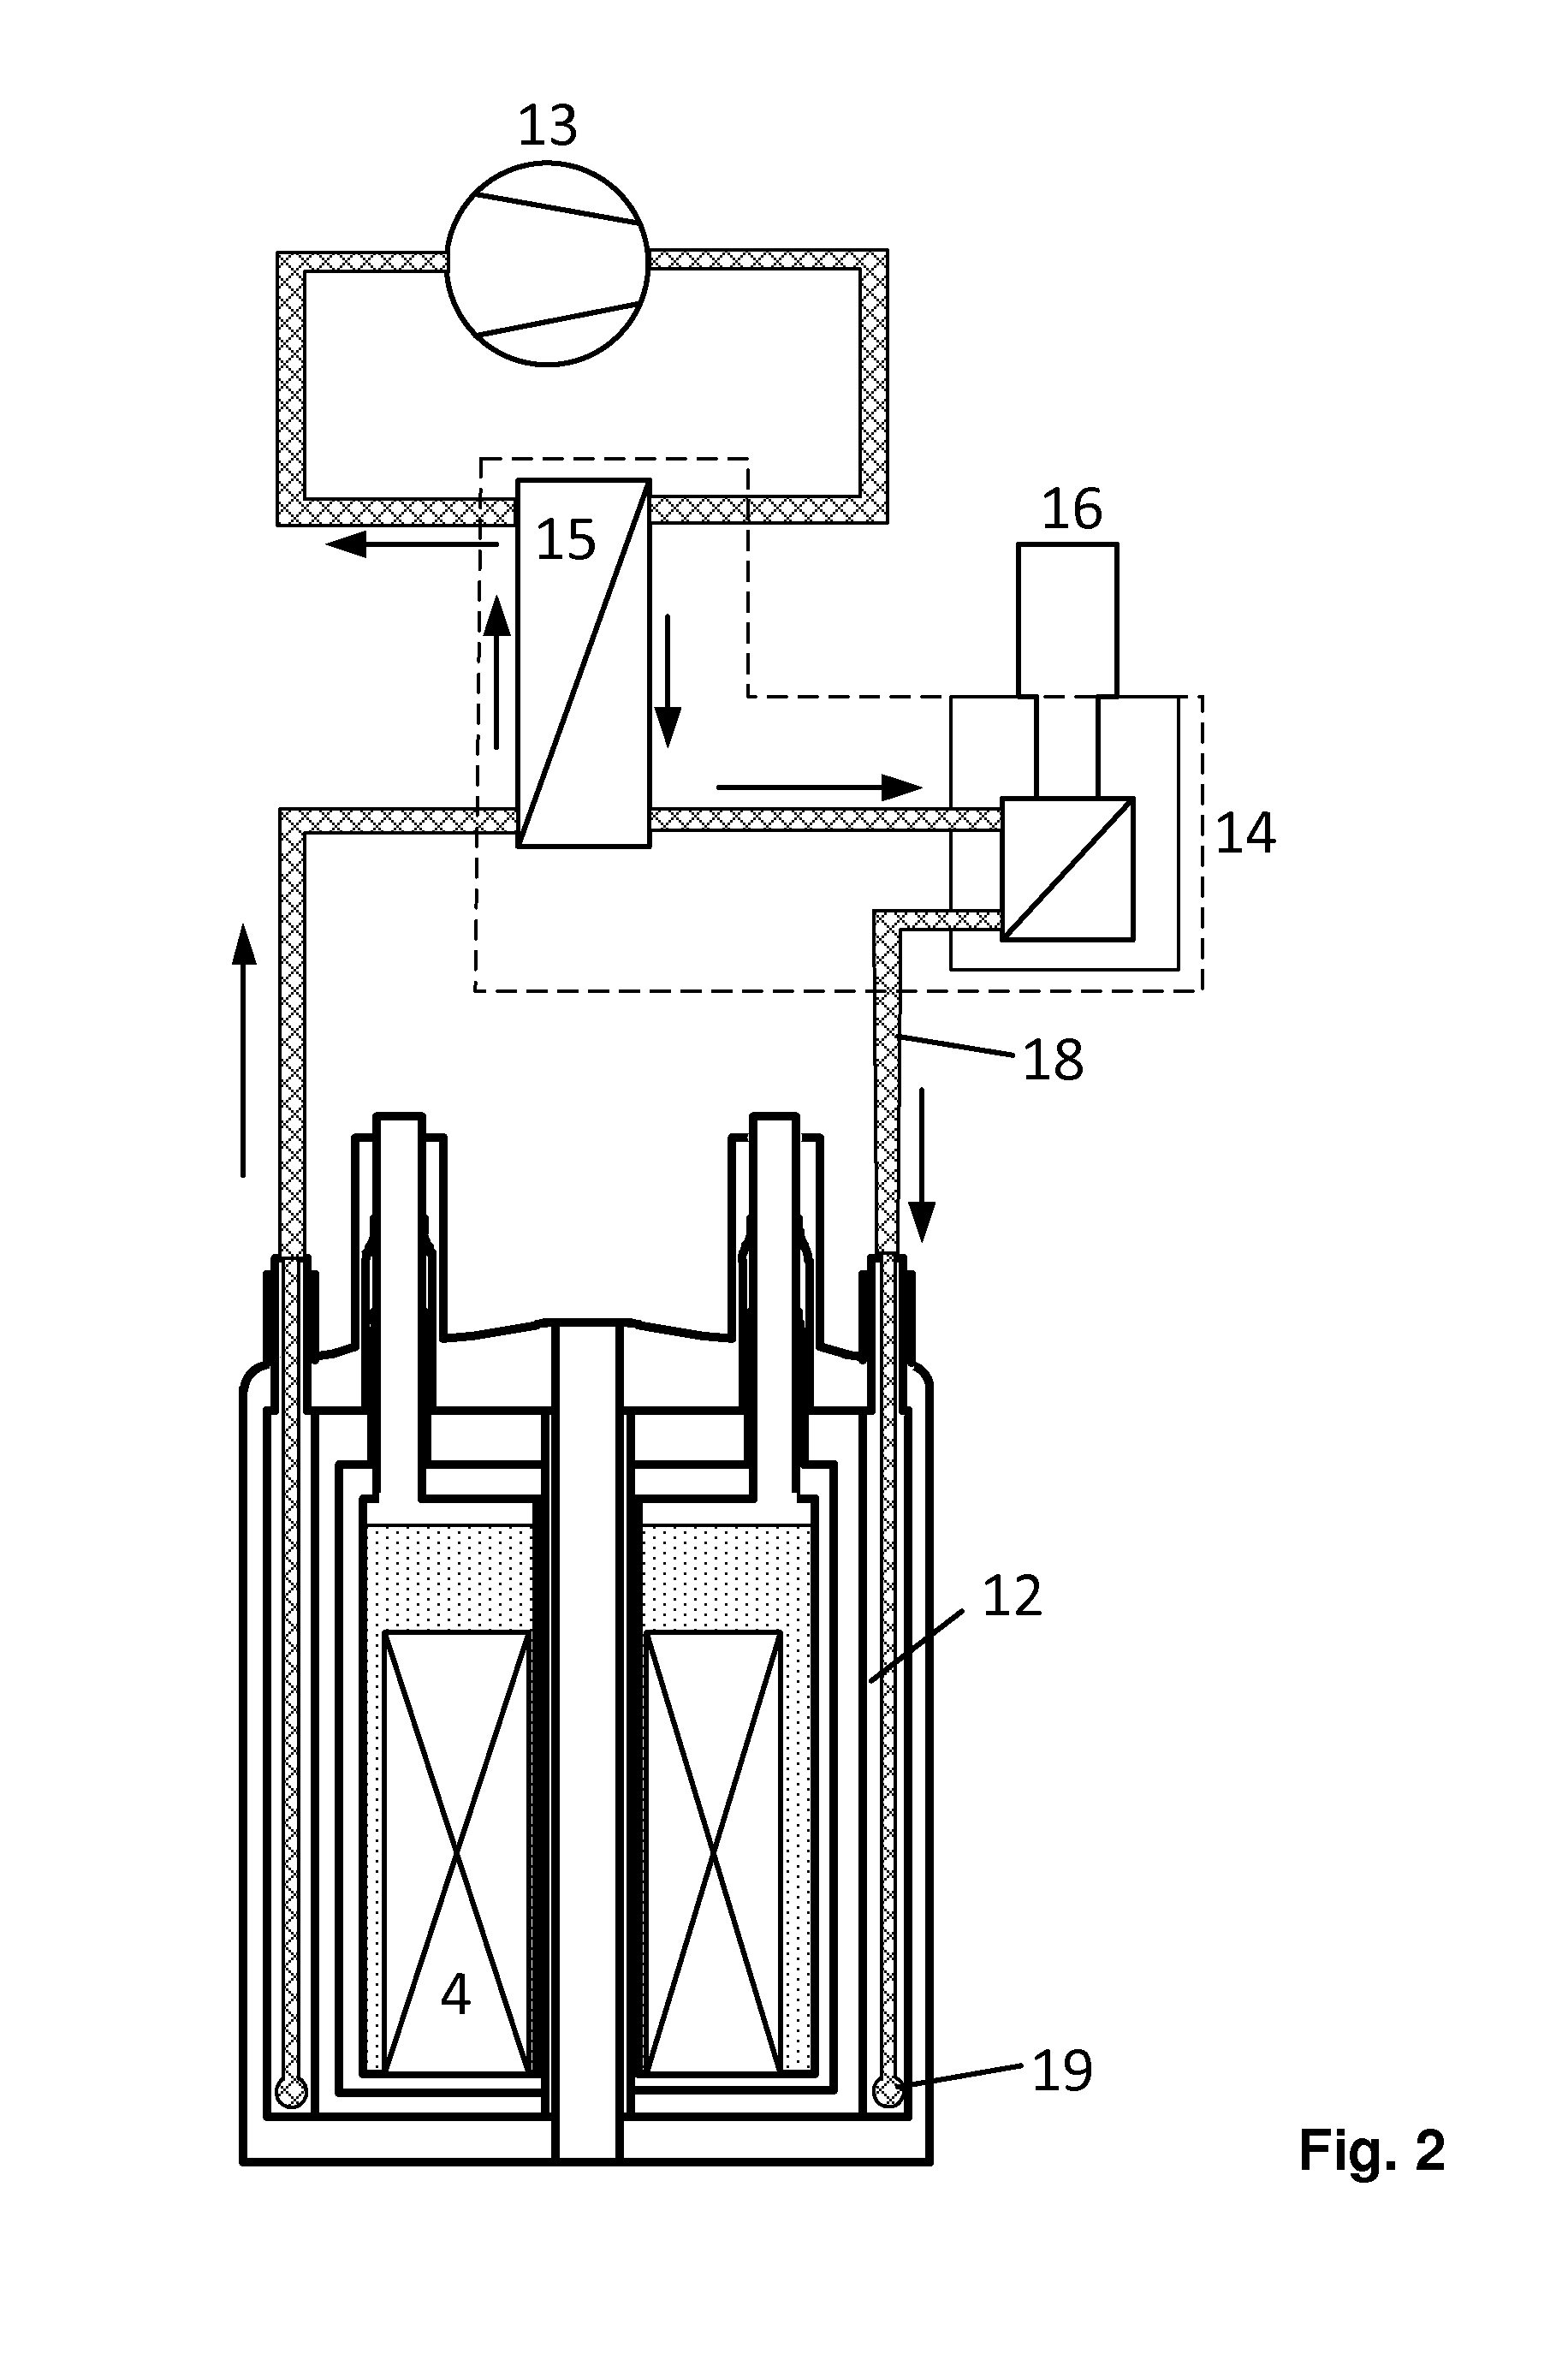 Method for reconfiguring a cryostat configuration for recirculation cooling